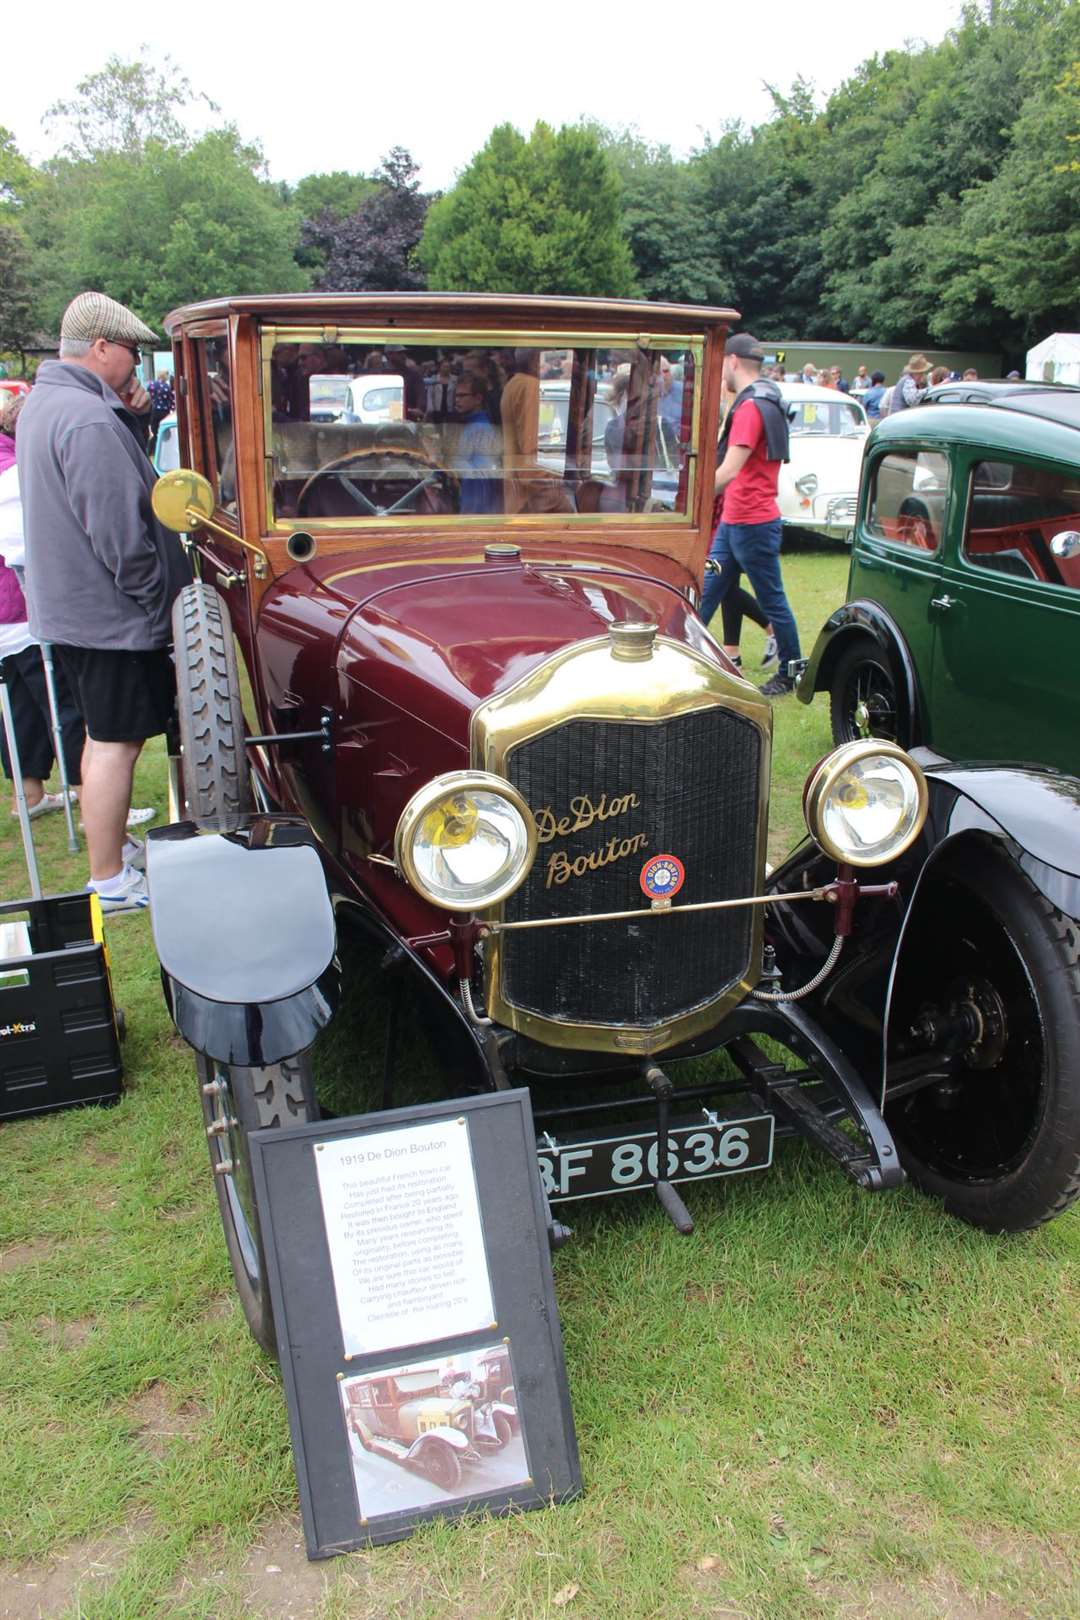 Classic car: This 1919 De Dion Bouton from France was exhibited at the Kent County Show by Paul Weeks who runs the Sweet Hut on Minster Leas, Sheppey (13545709)